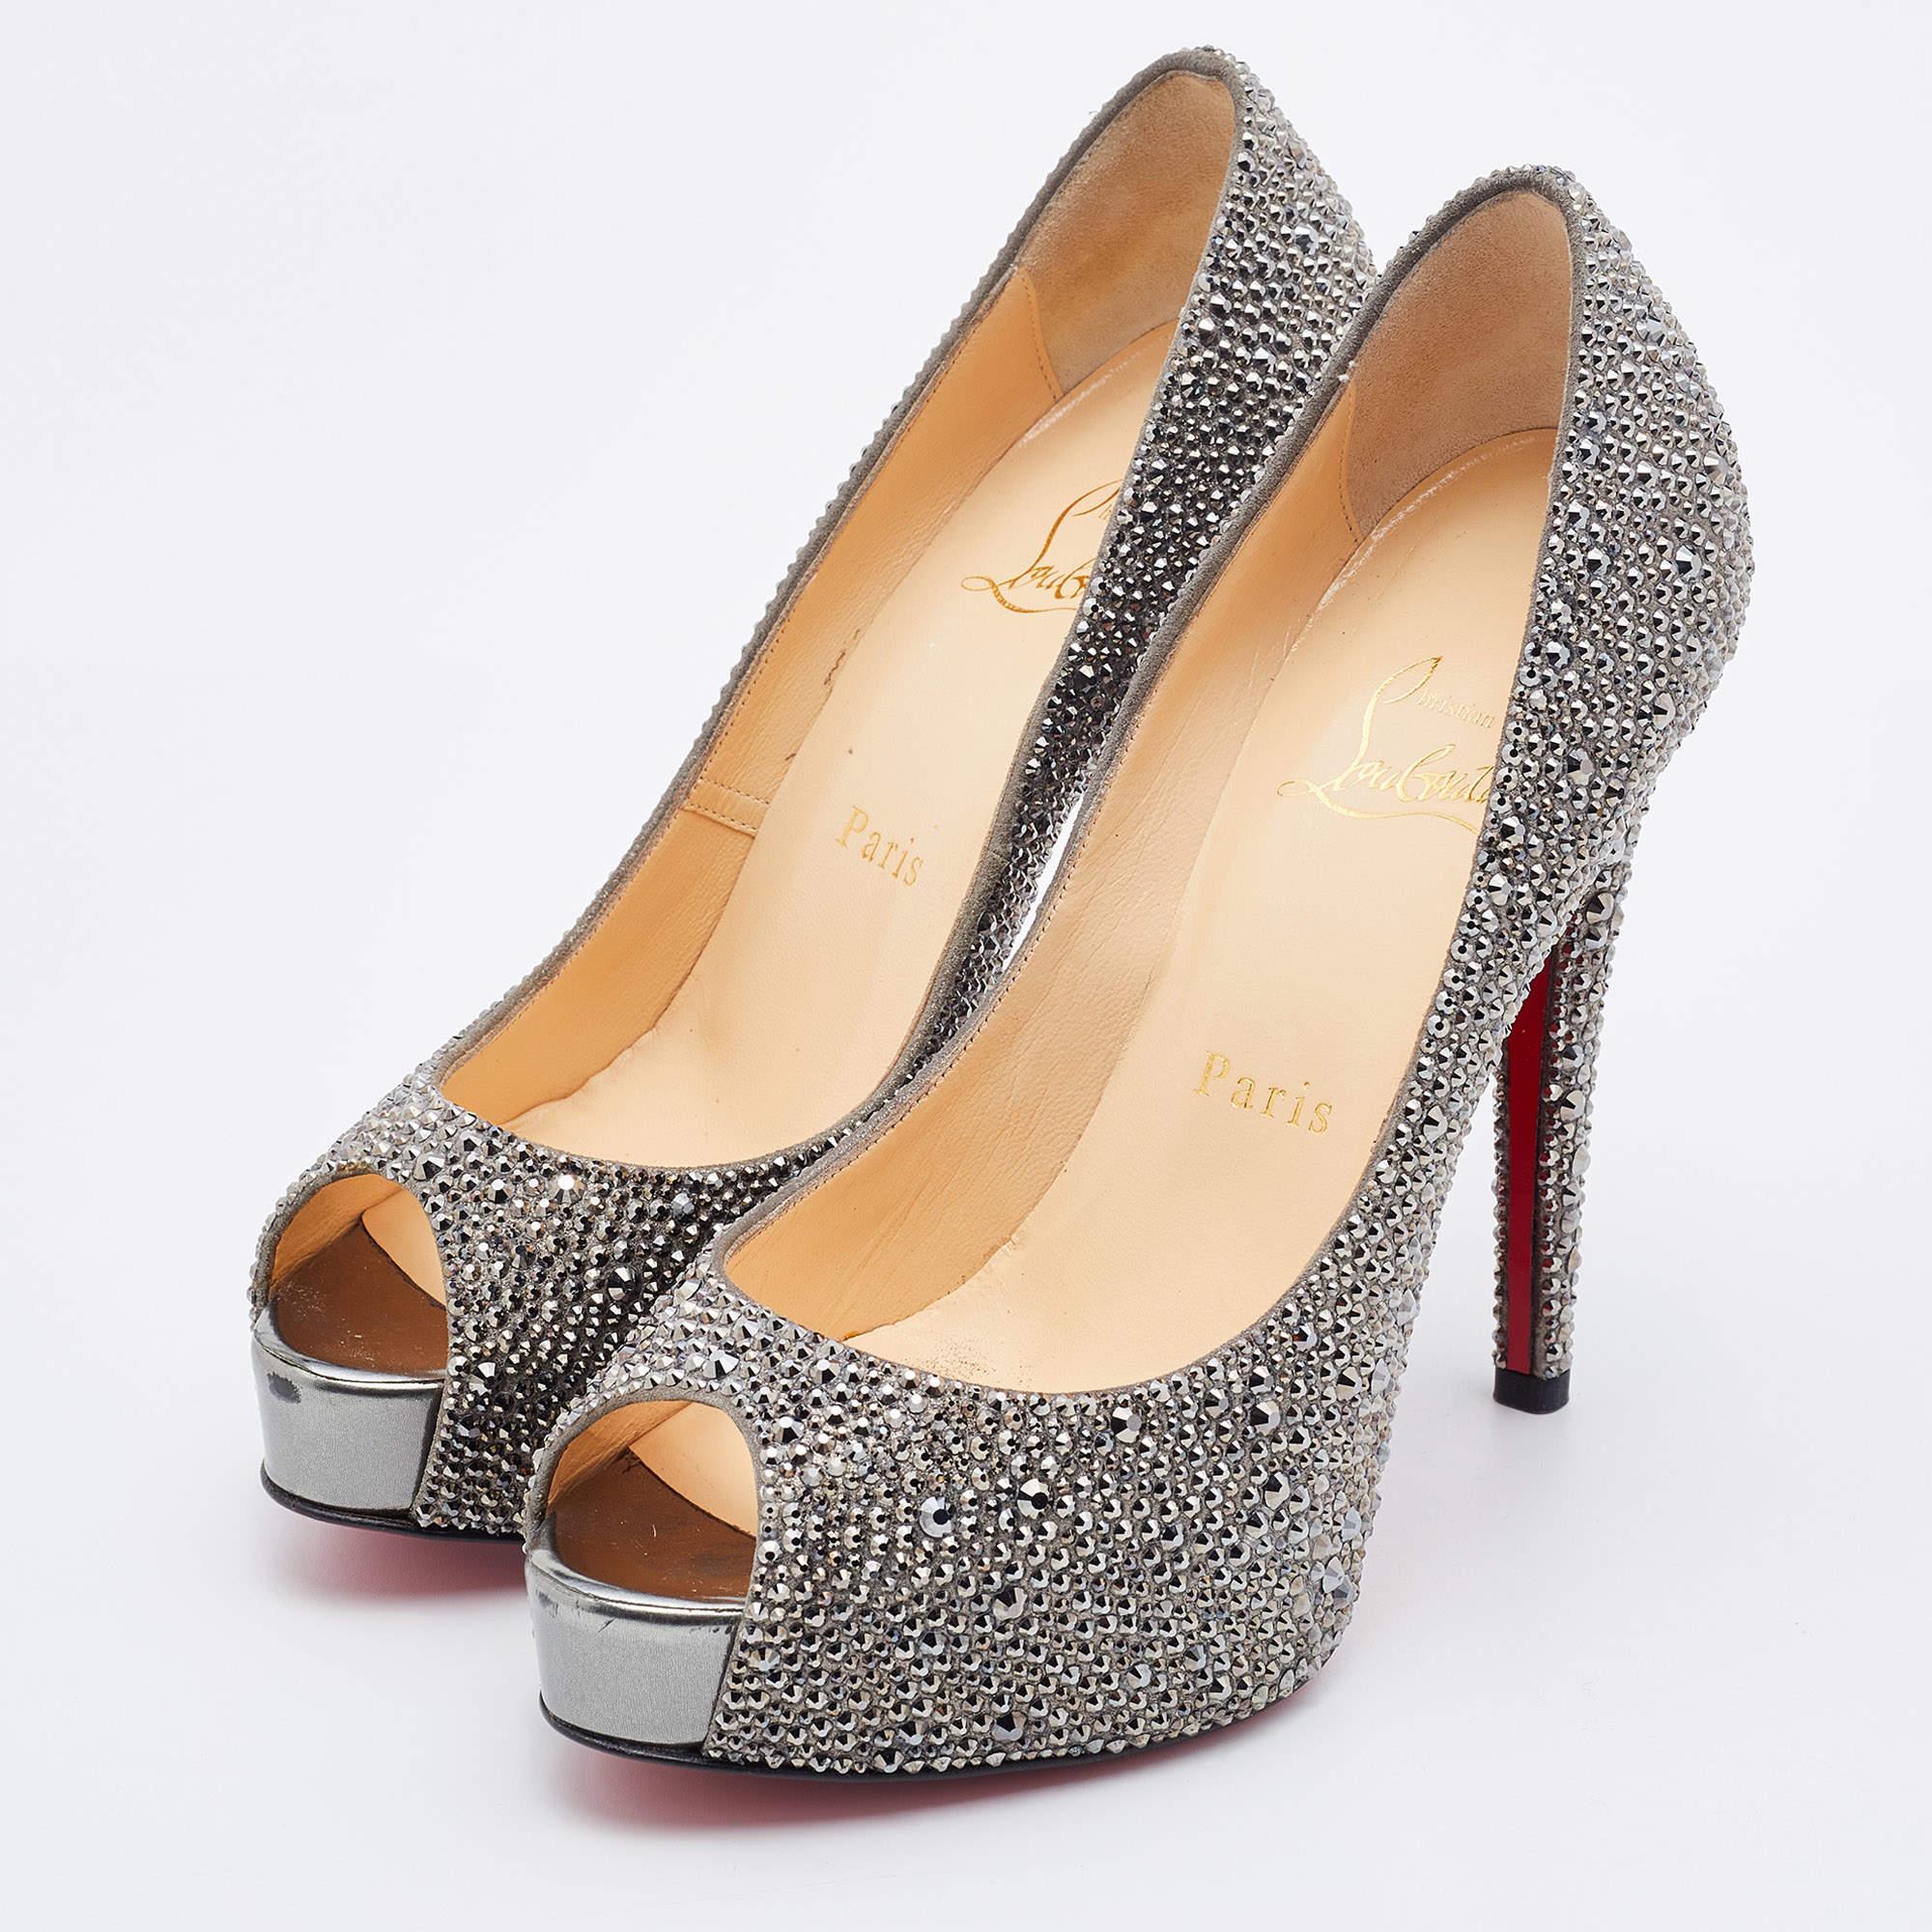 Exuding feminity and elegance, these pumps feature a chic silhouette with an attractive design. You can wear these pumps for a stylish look.

Includes: Original Box